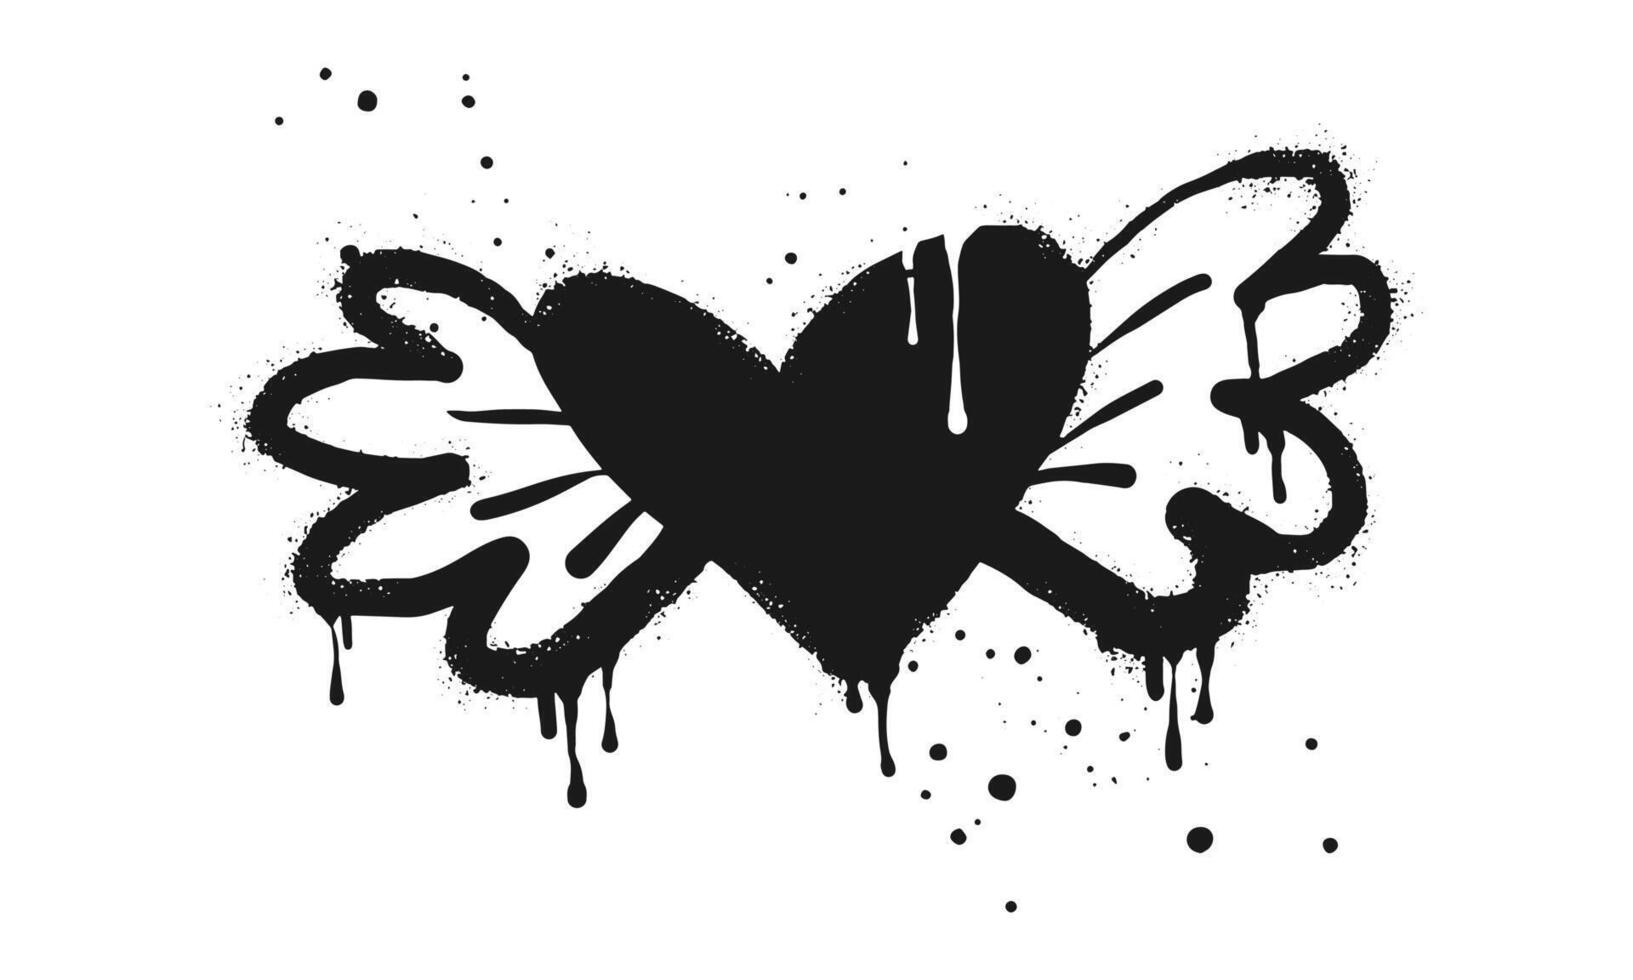 Spray painted graffiti flying heart with wings icon in black over white. Heart with wings drip symbol. isolated on white background. illustration vector